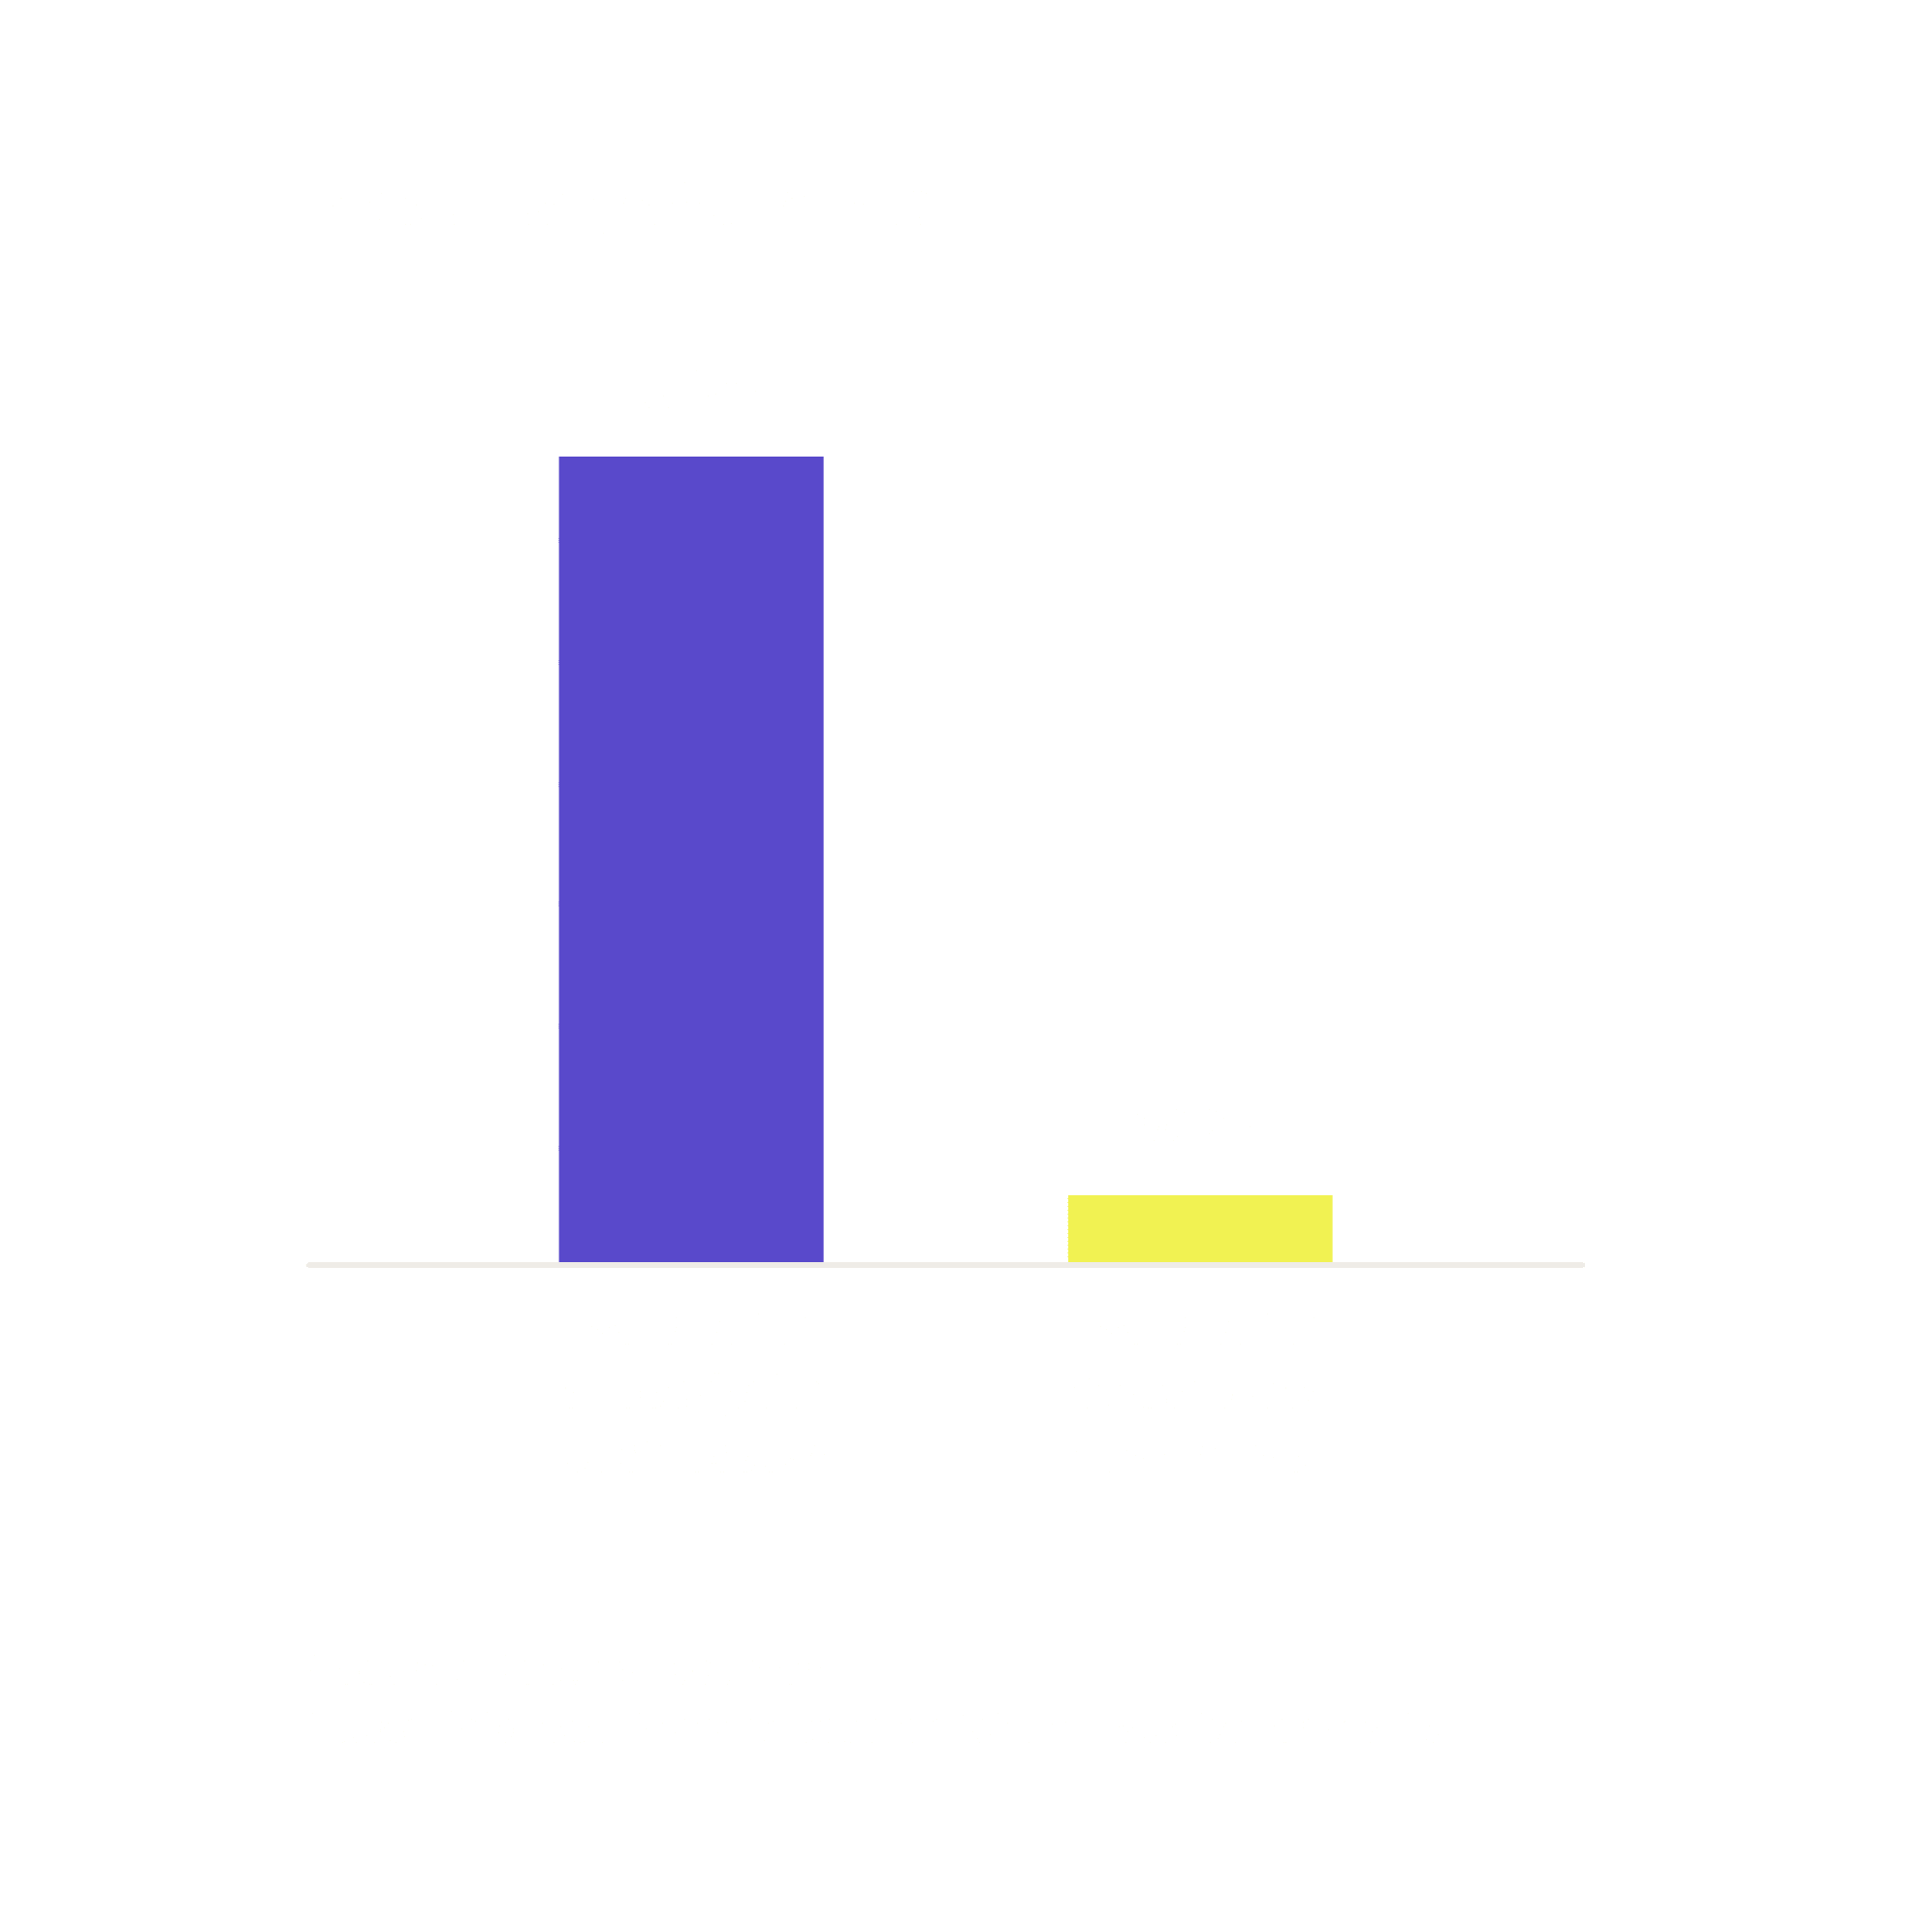 30% of your churn is involuntary